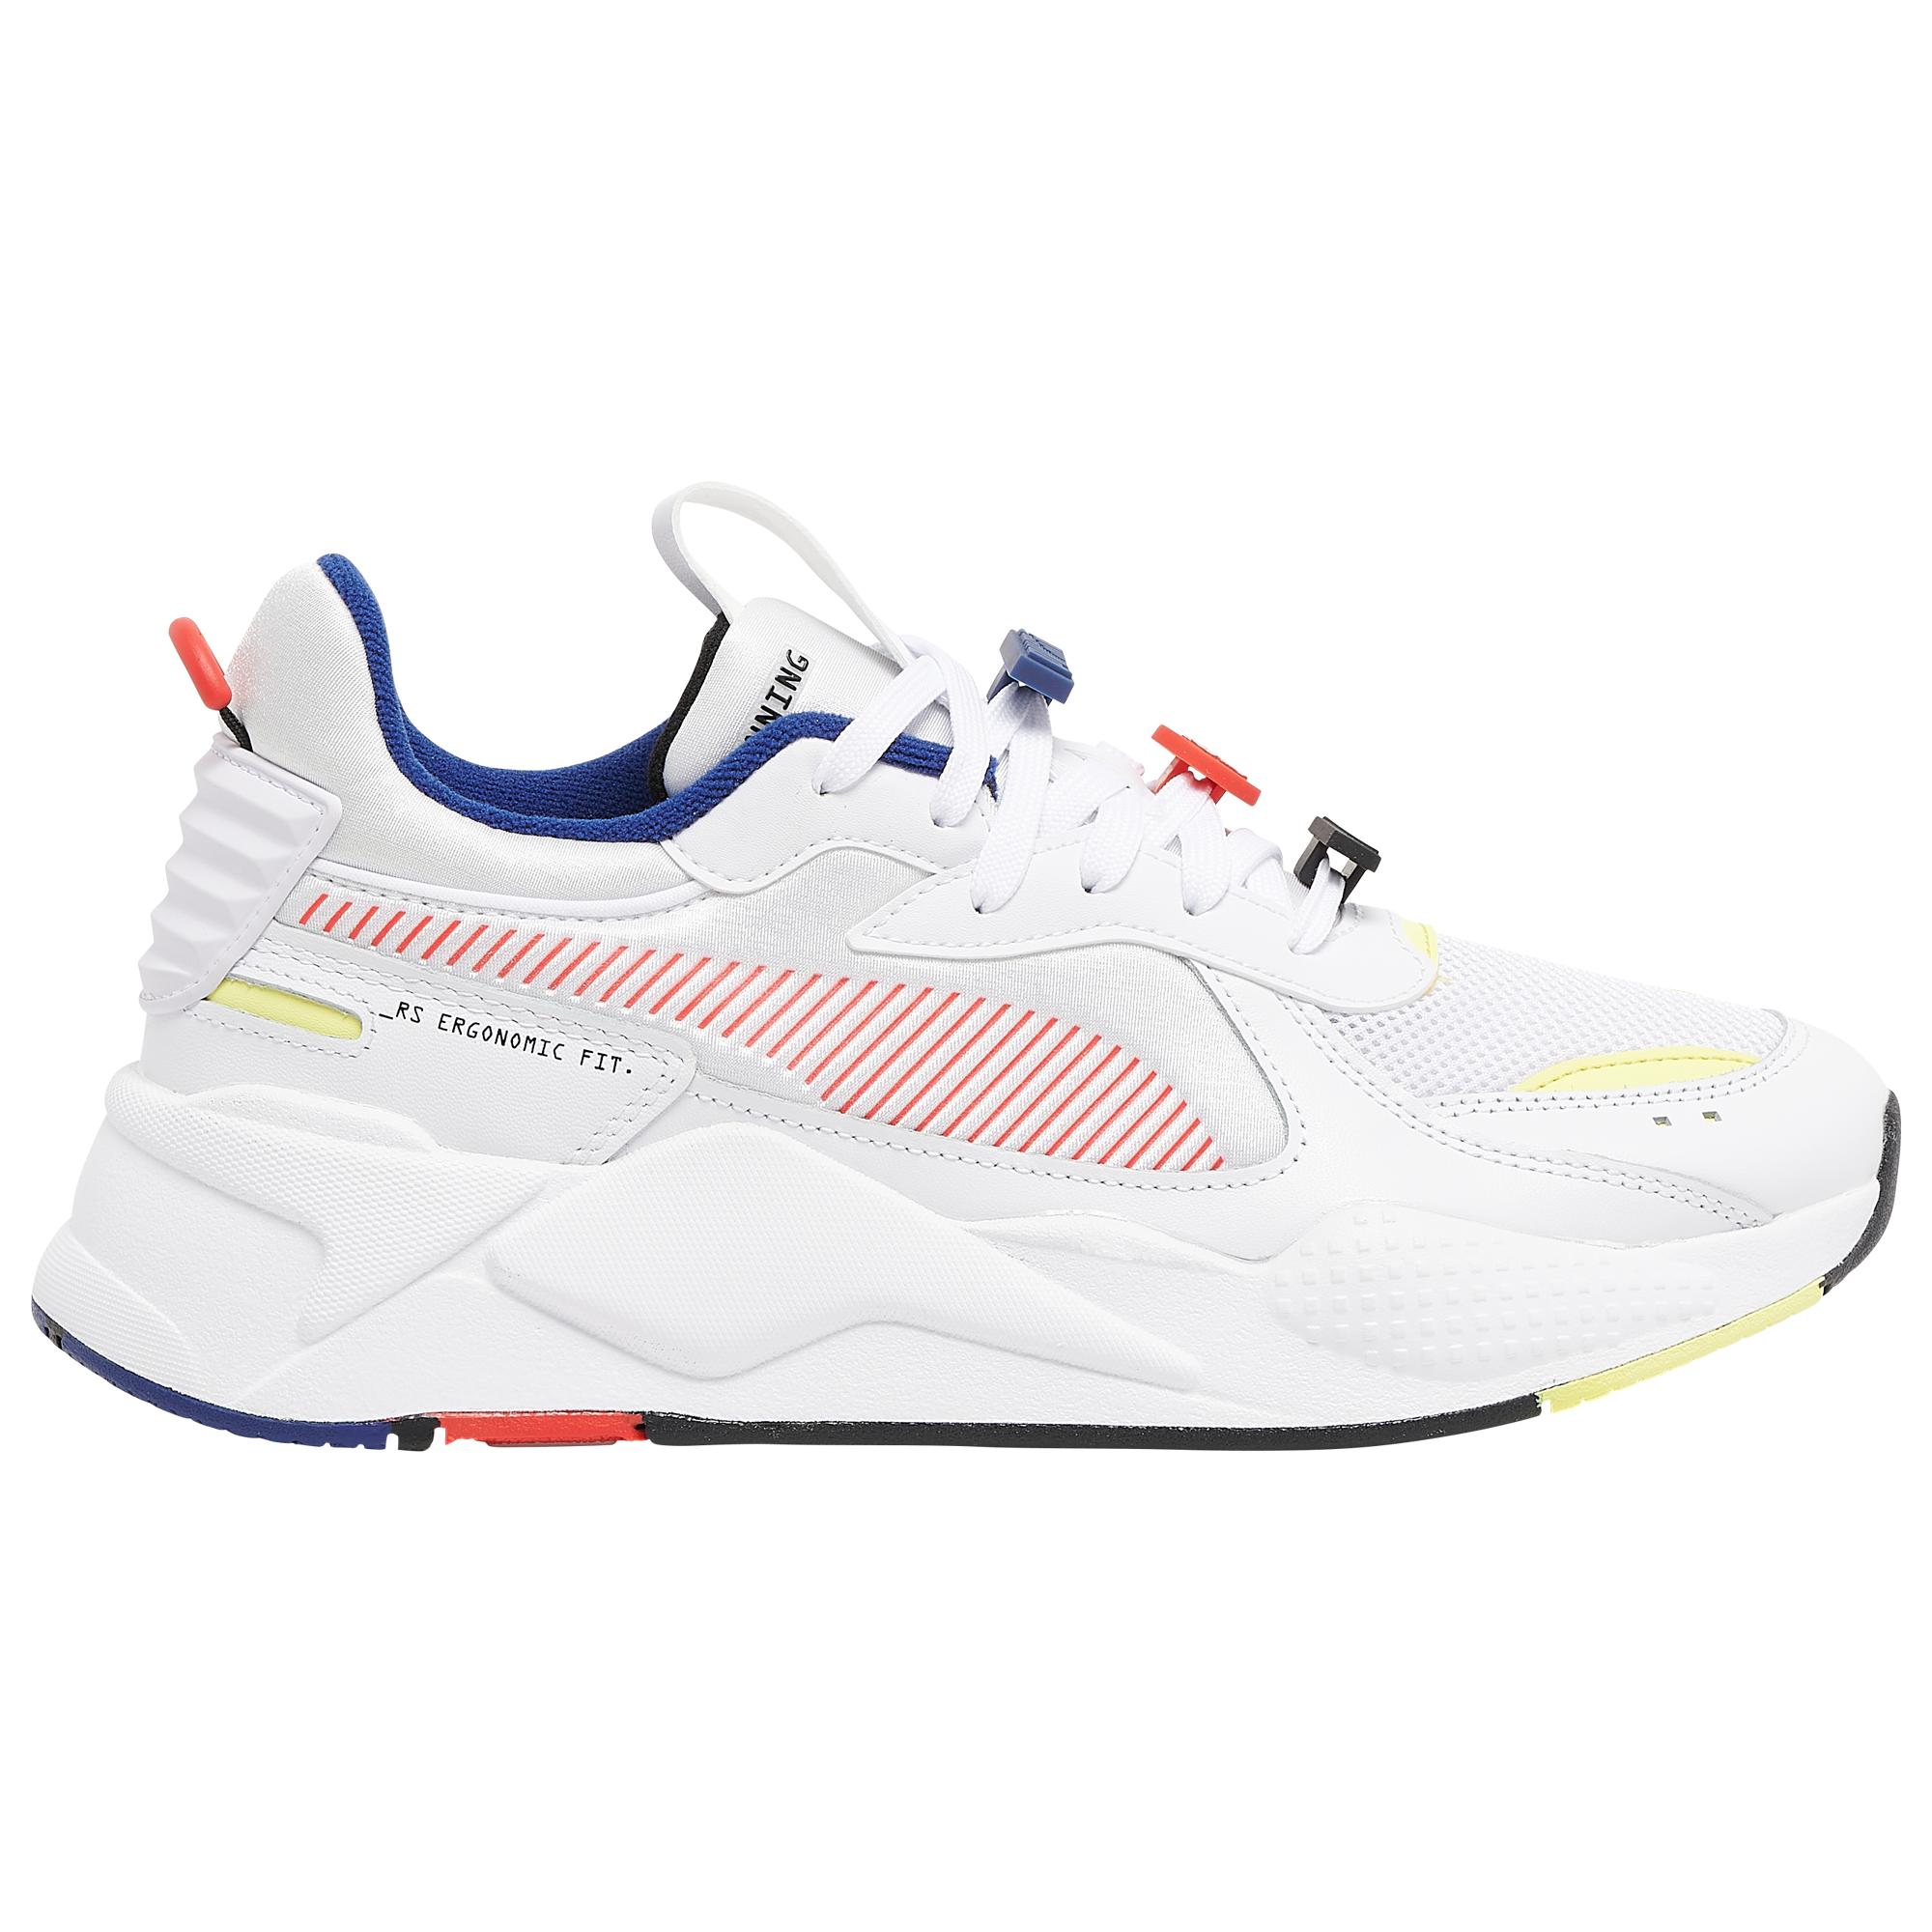 PUMA Rs-x - Shoes in White/Red/Yellow (White) for Men | Lyst